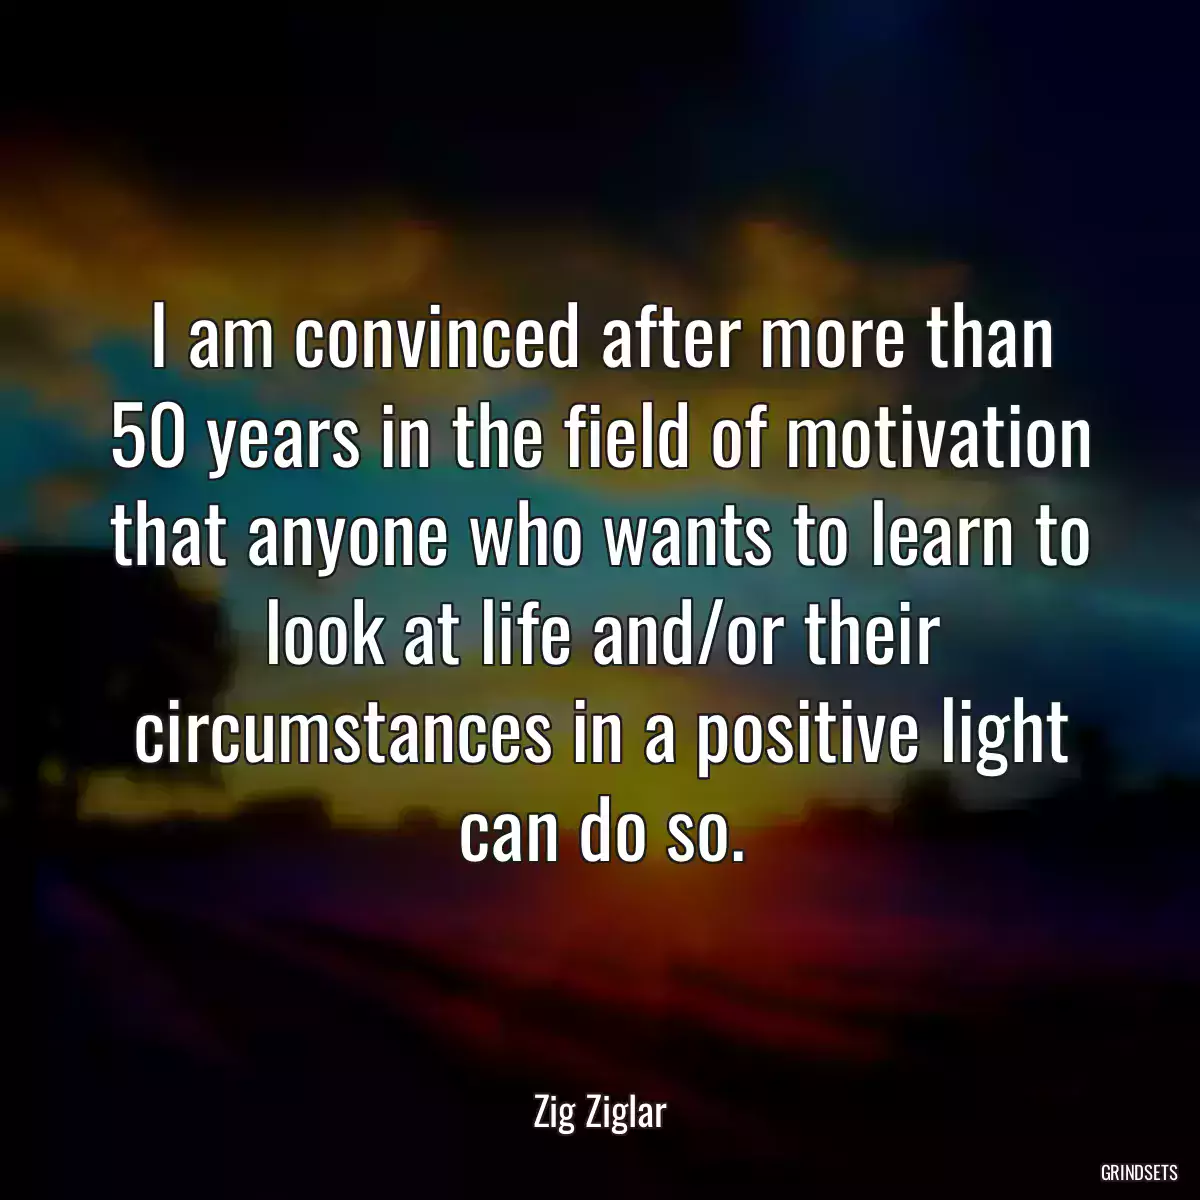 I am convinced after more than 50 years in the field of motivation that anyone who wants to learn to look at life and/or their circumstances in a positive light can do so.